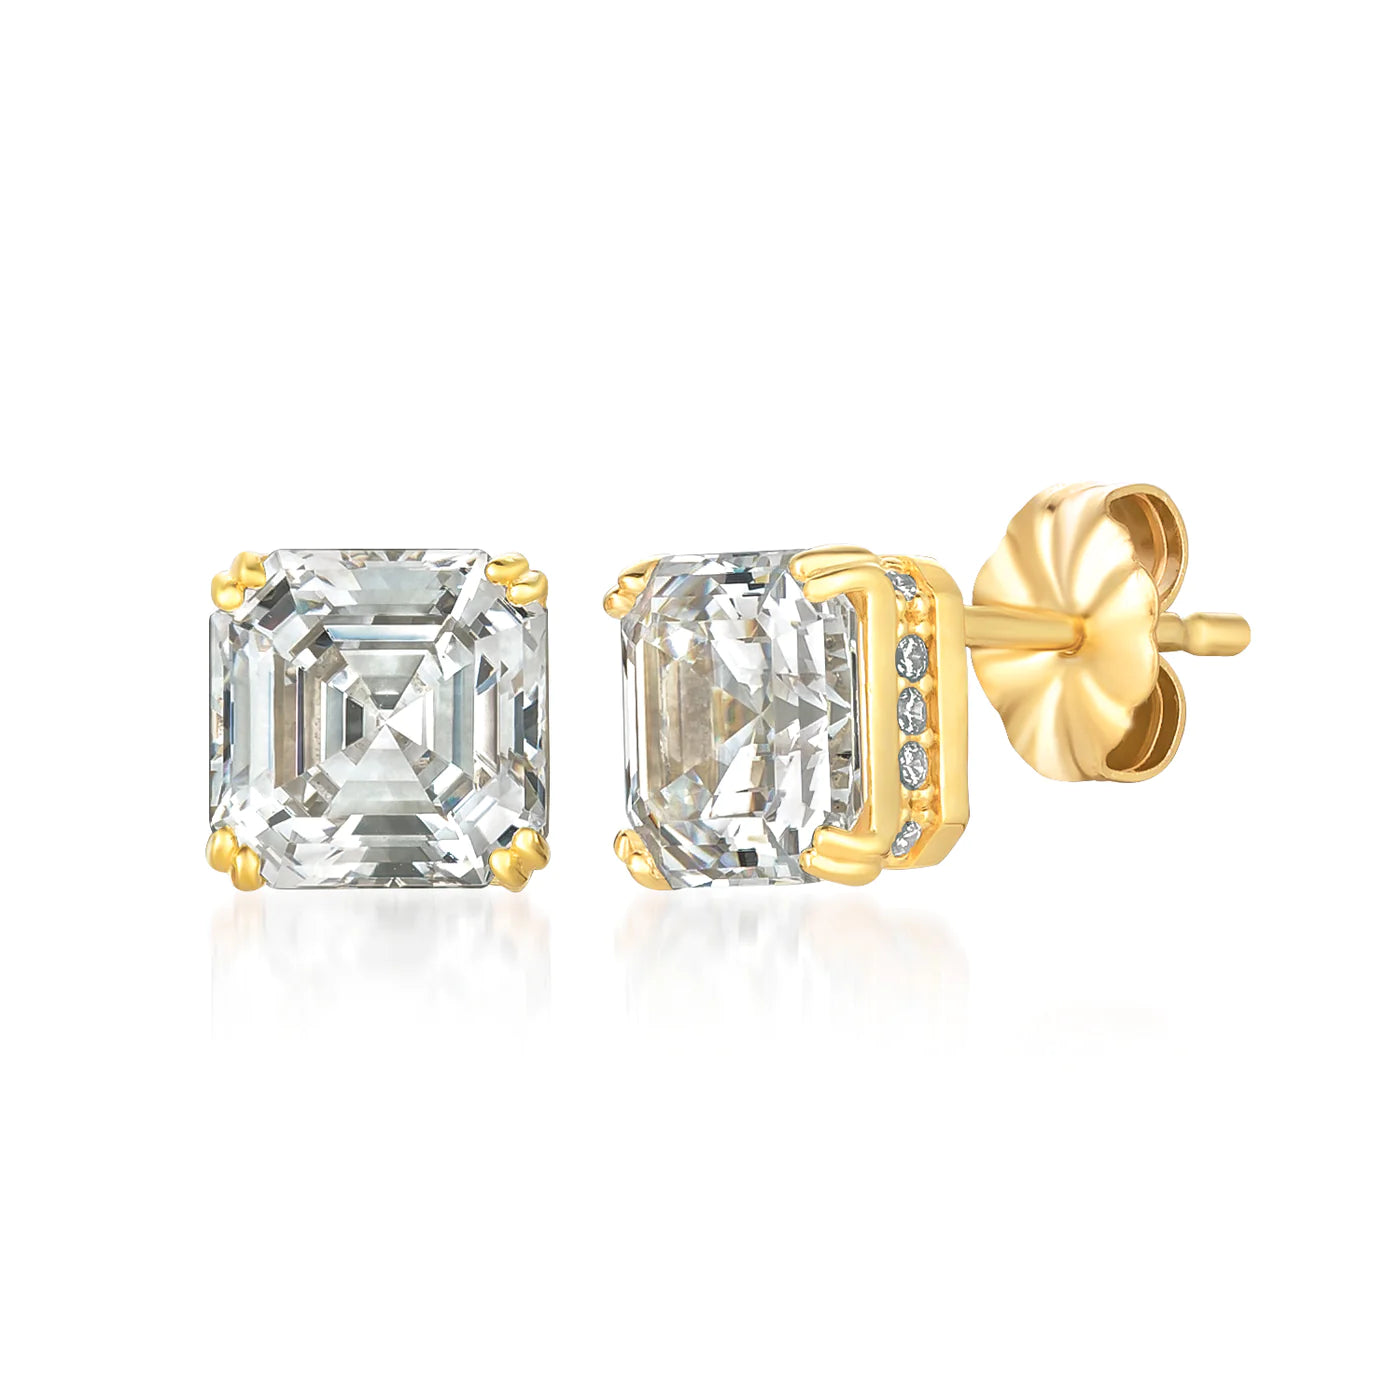 Royal Asscher Cut Stud Earrings Finished in 18kt Yellow Gold